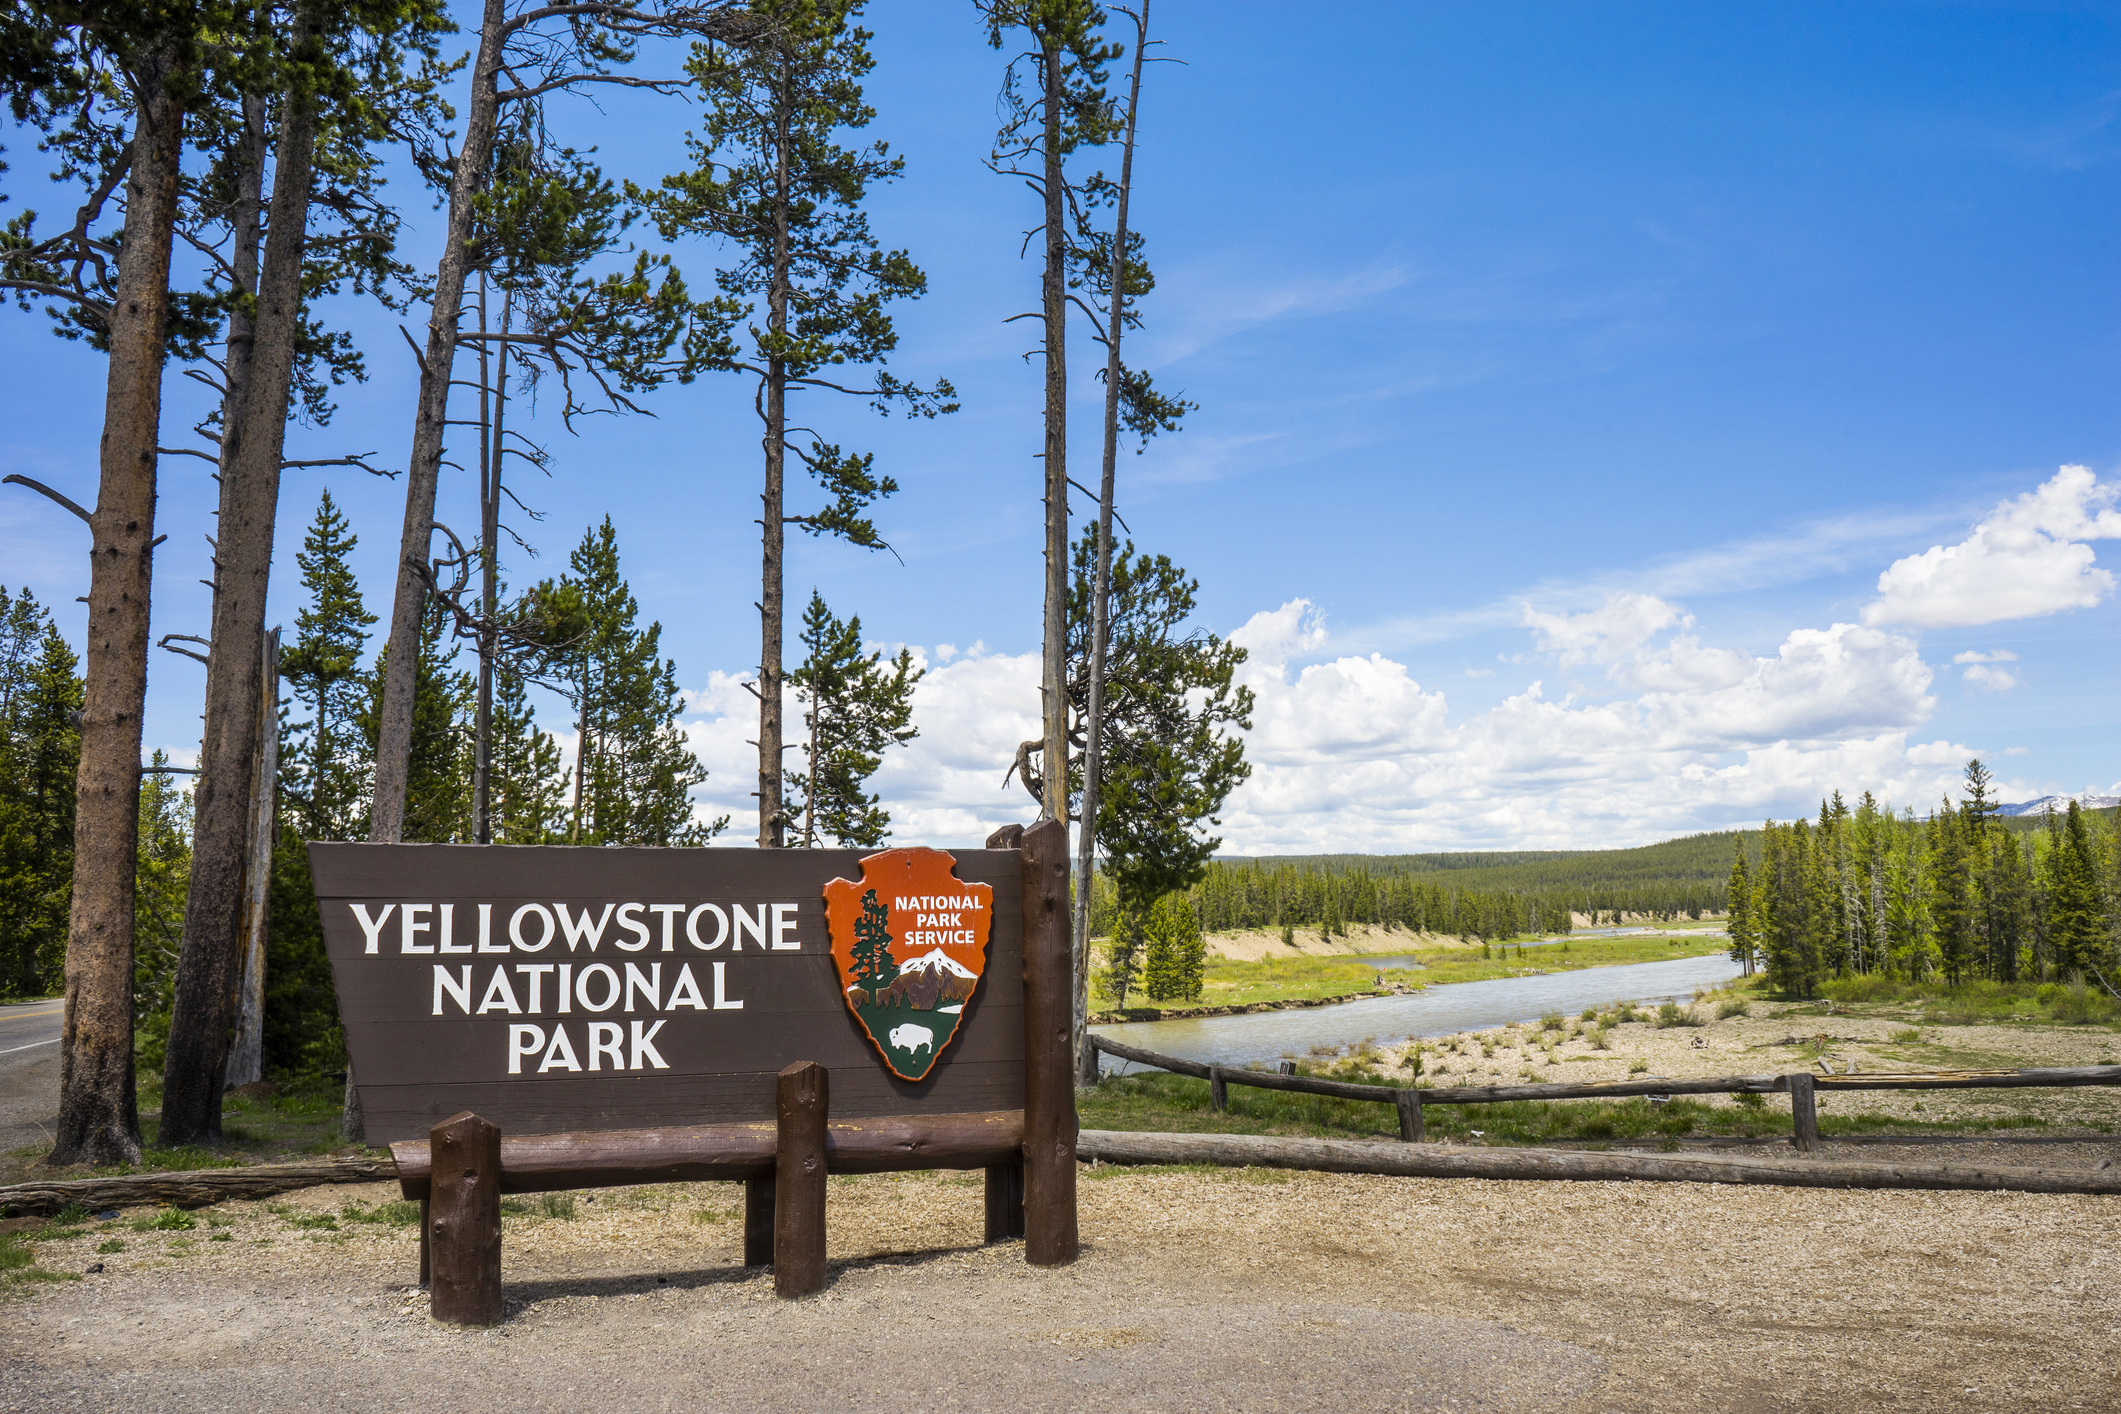 Yellowstone National Park entrance sign with trees and a stream in the background